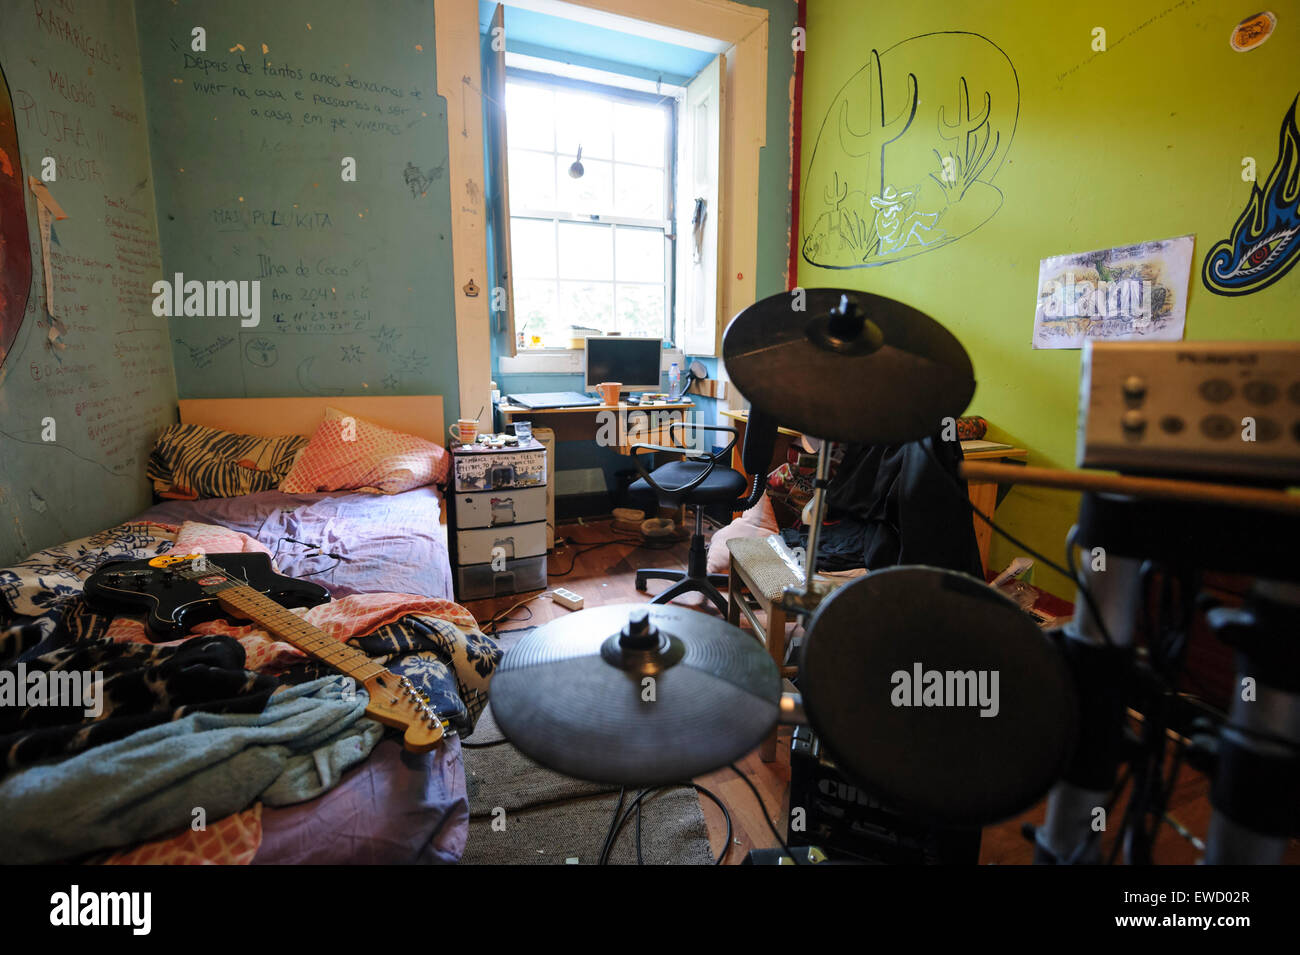 Small messy teenager bedroom with electronic drums kit and guitar on top of the unmade bed Stock Photo